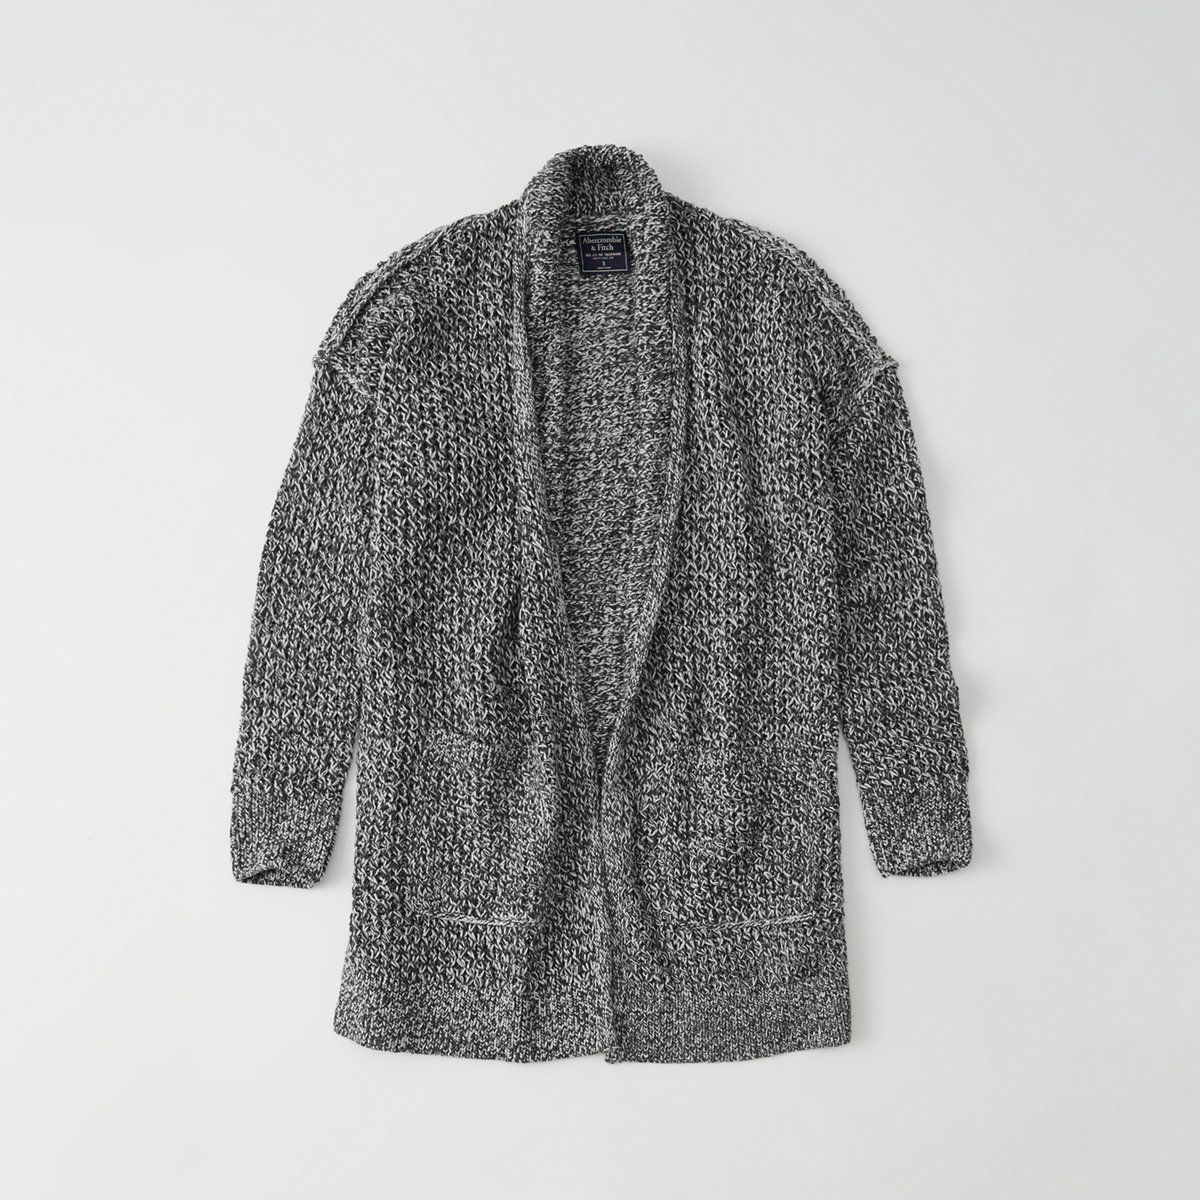 Textured Open Front Cardigan | Abercrombie & Fitch US & UK